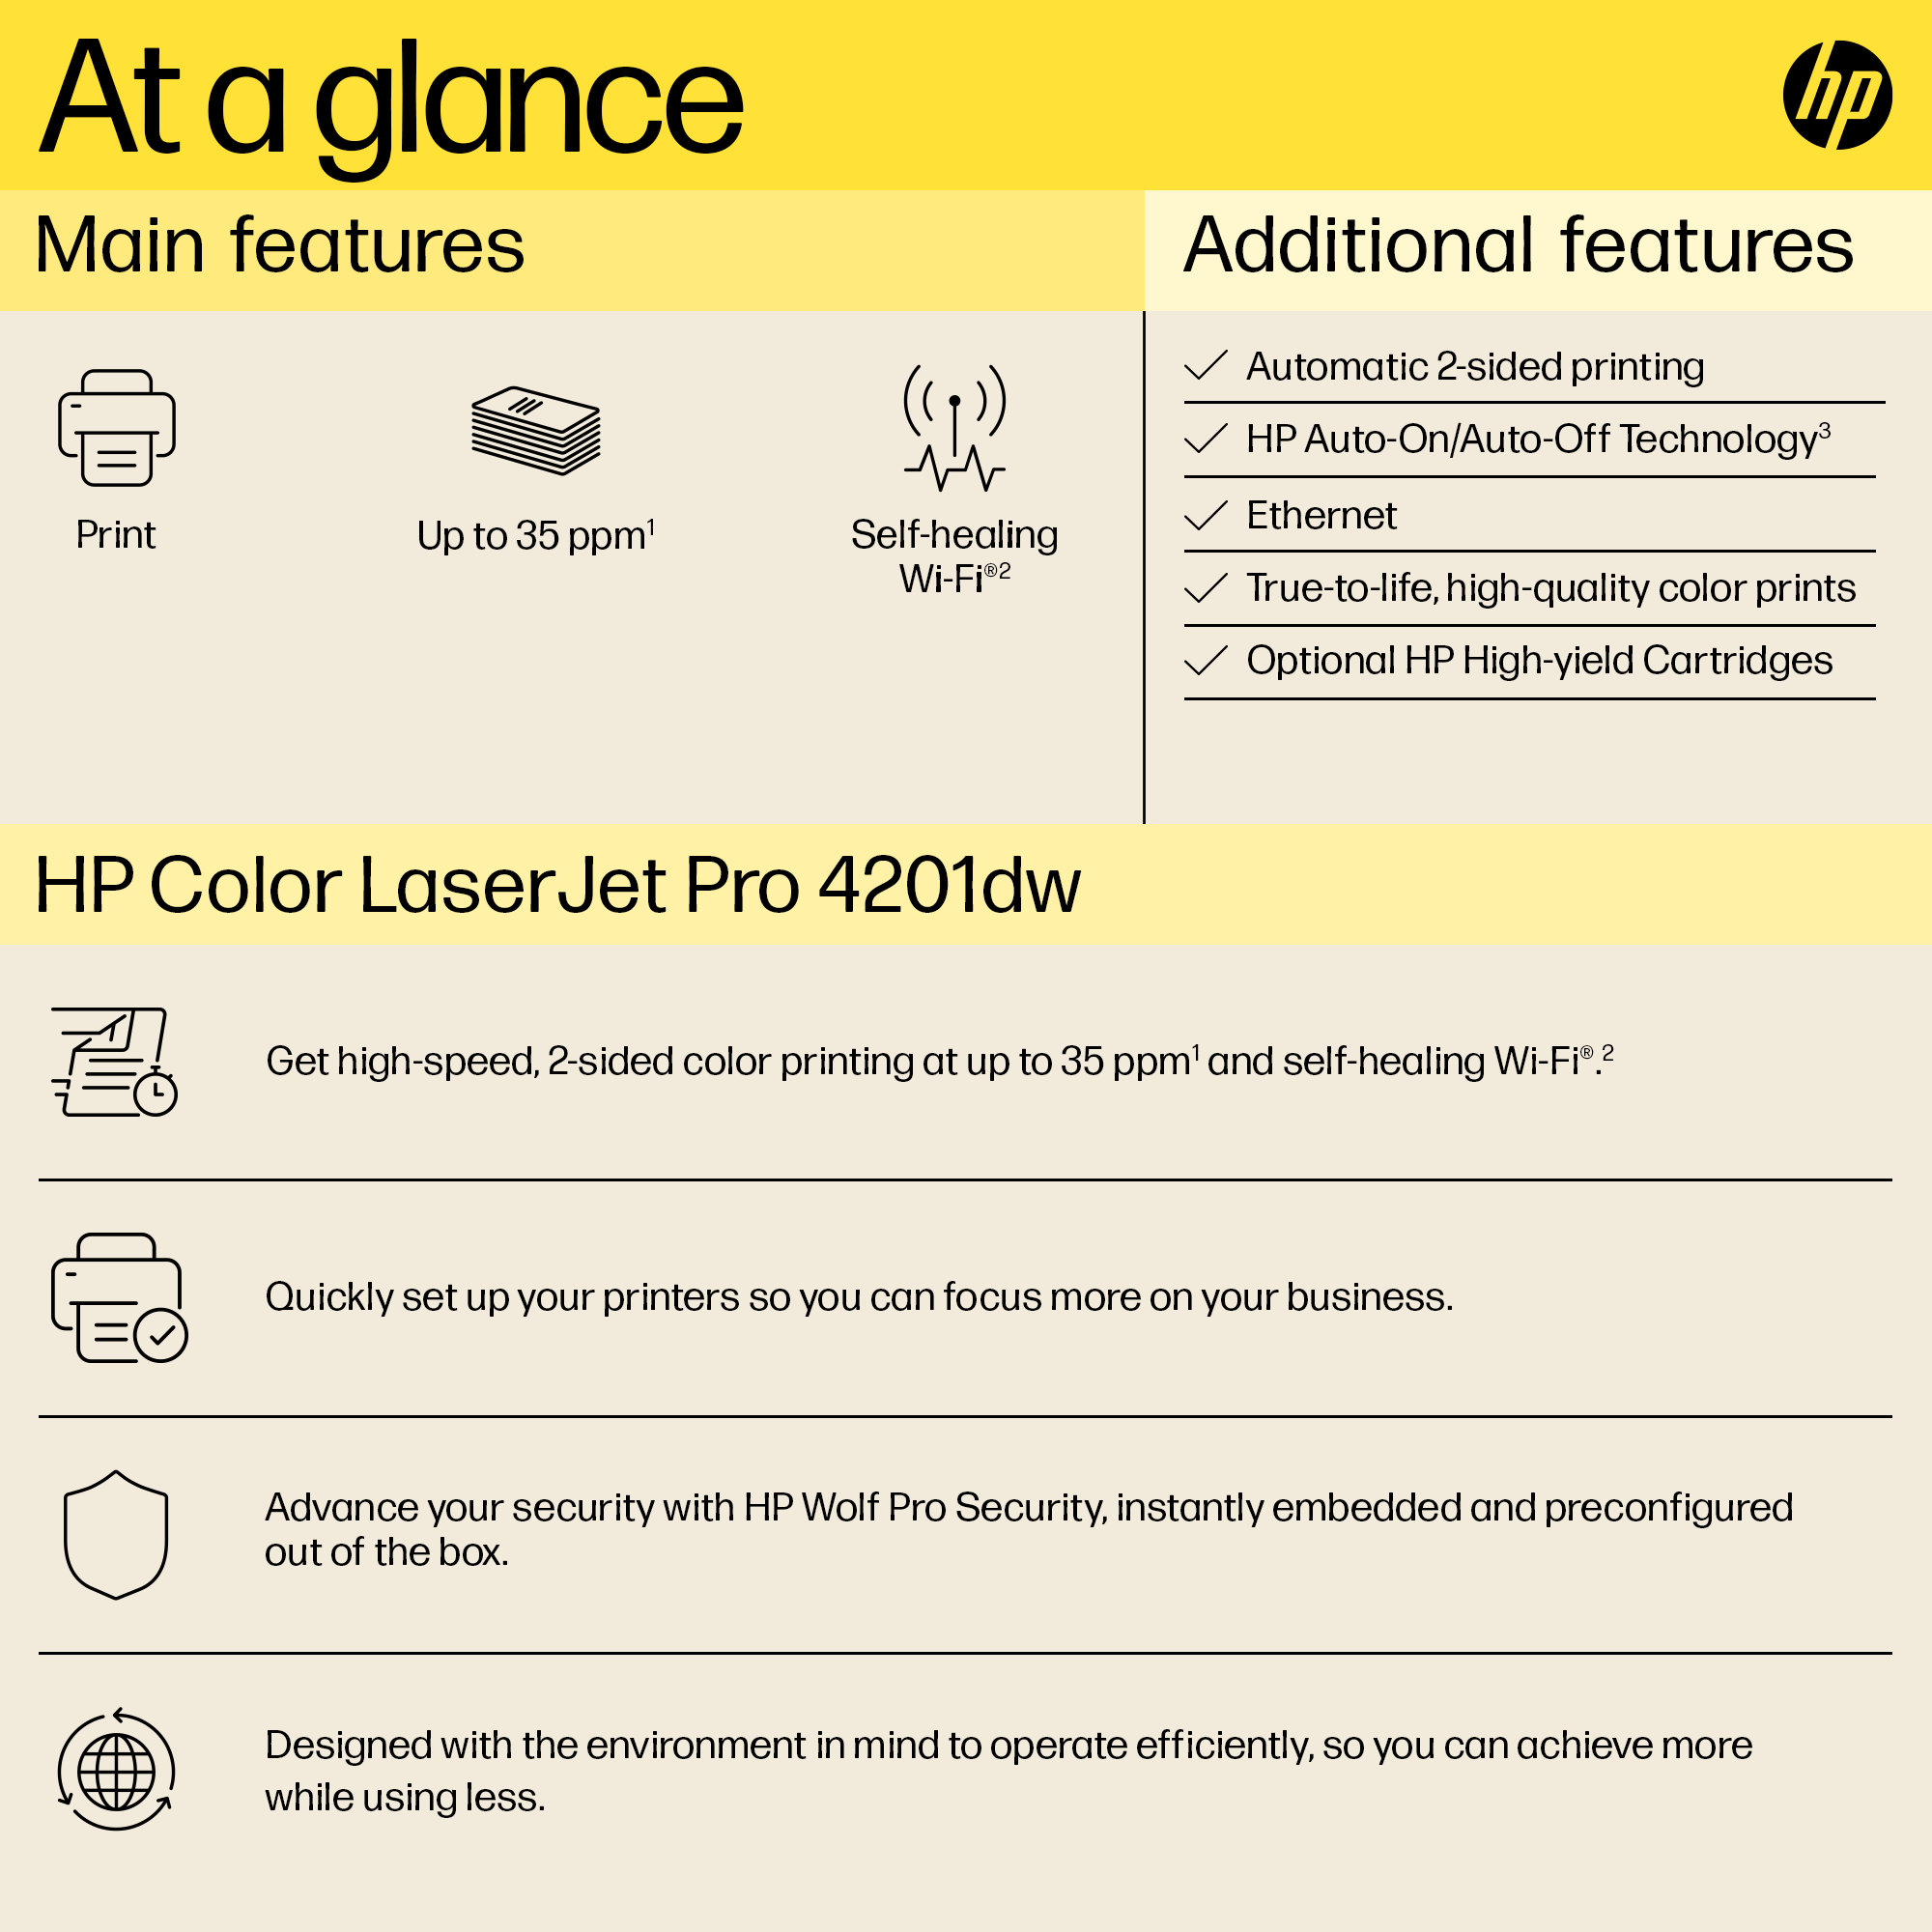 At a glance: Main Features HP Color LJP 4201dw